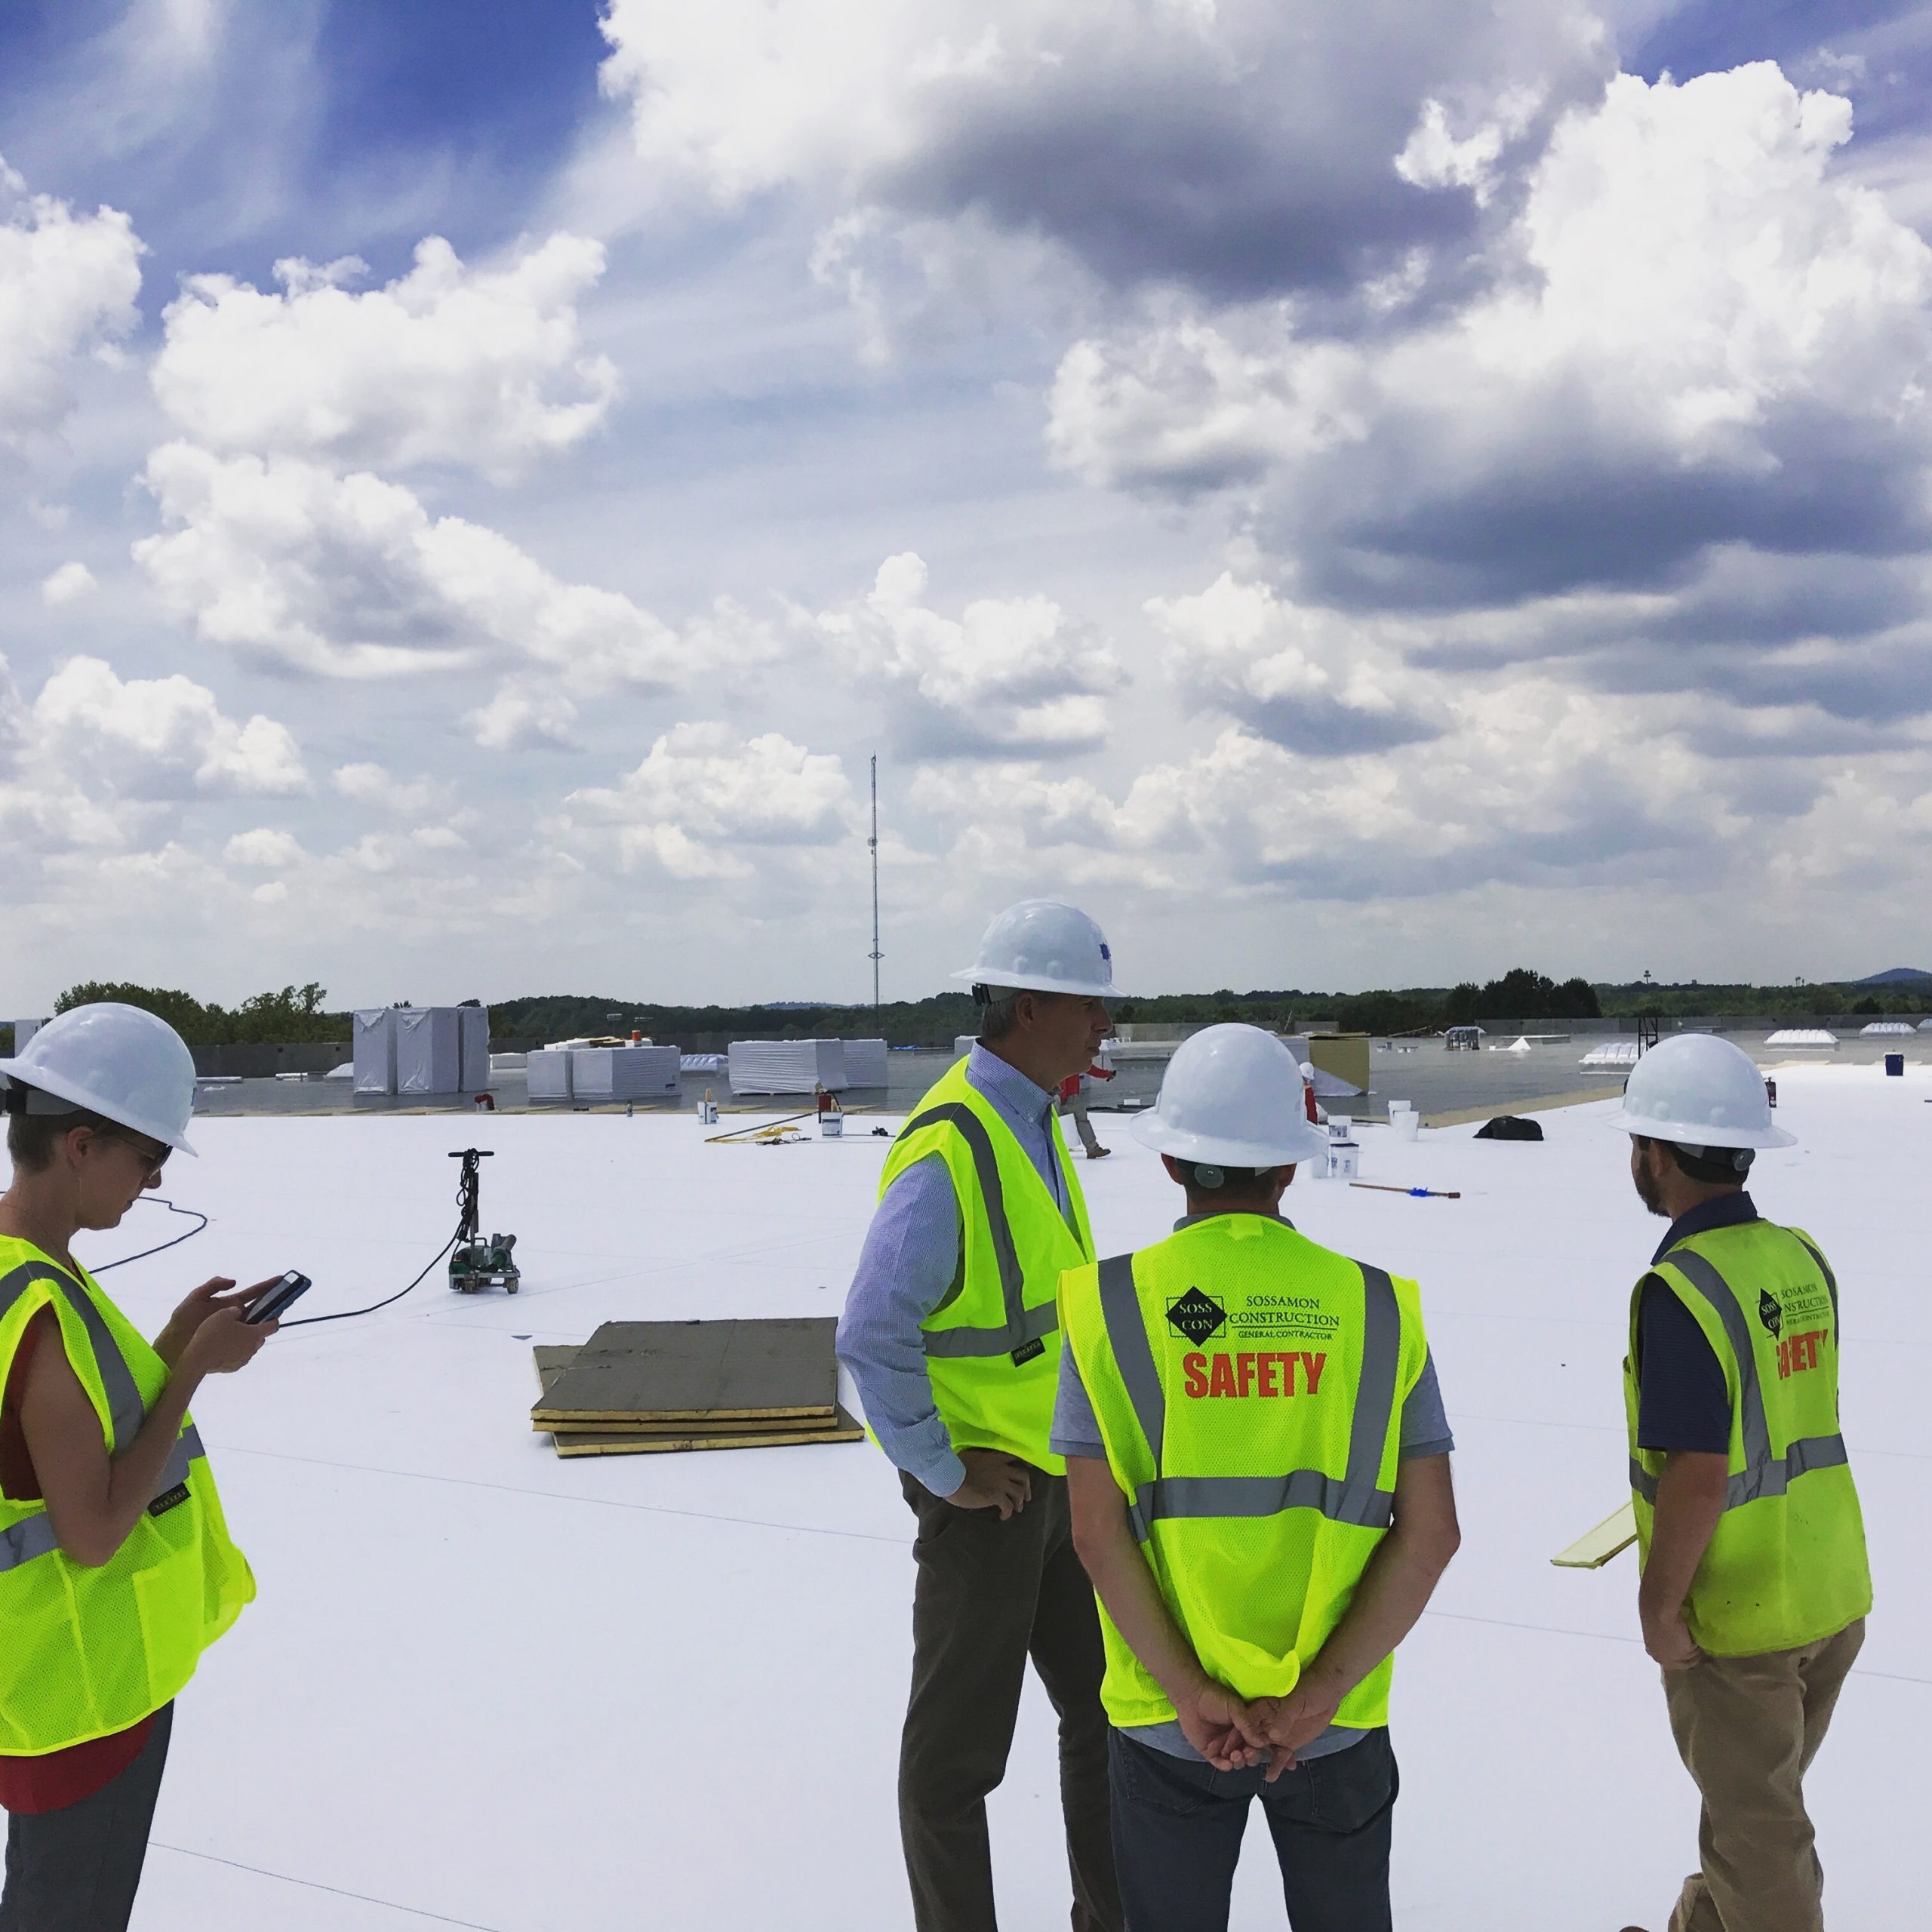 Featured image for “Roof-walk at Daimler Logistics Center”